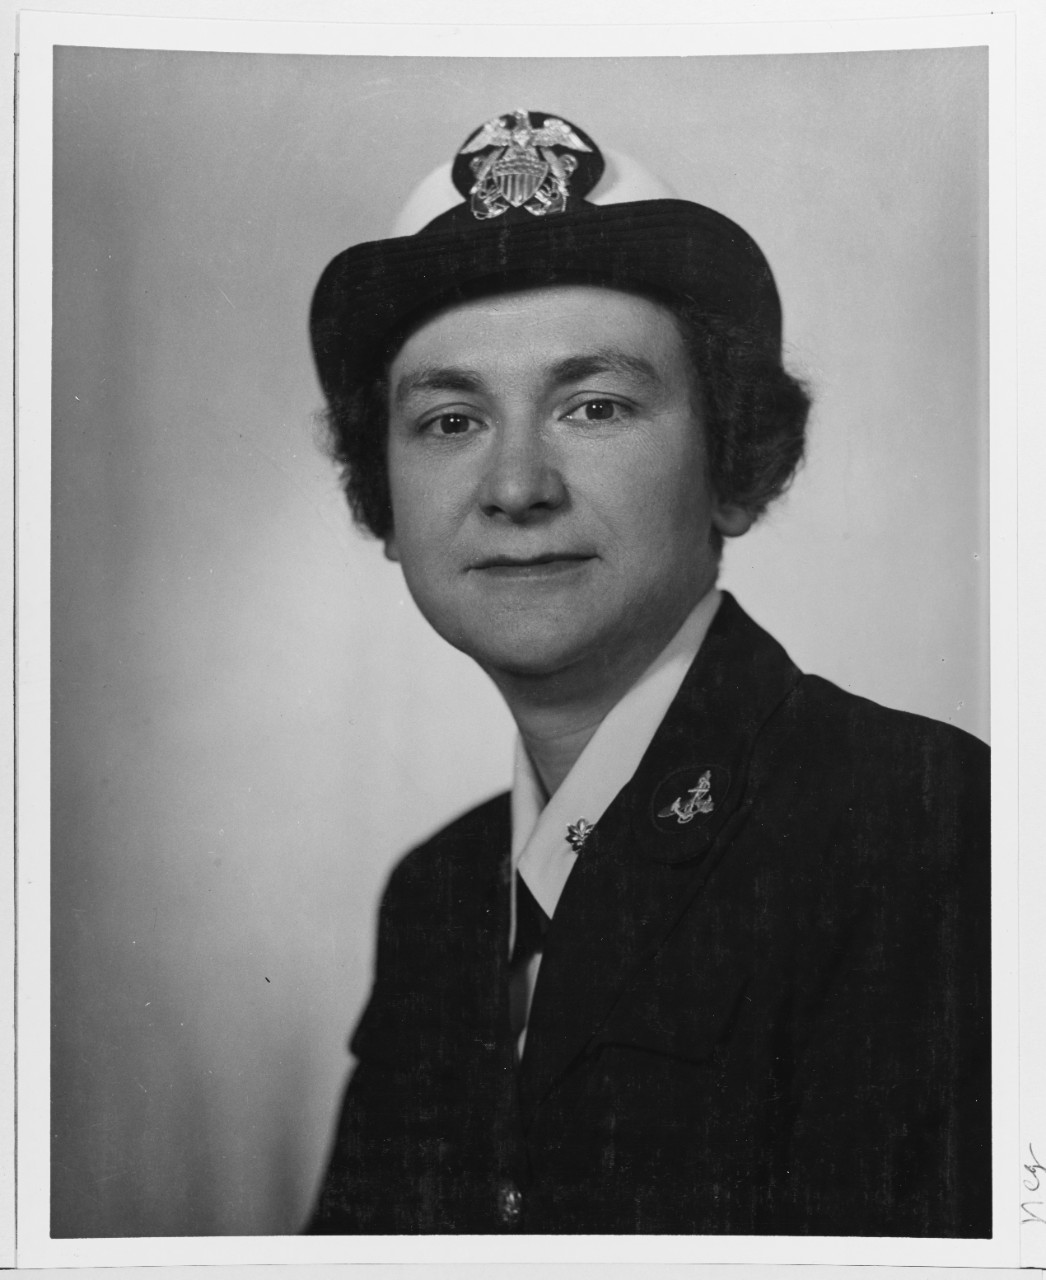 Photo #: 80-G-424329  Lieutenant Commander Mildred H. McAfee, USNR, Director of the WAVES  